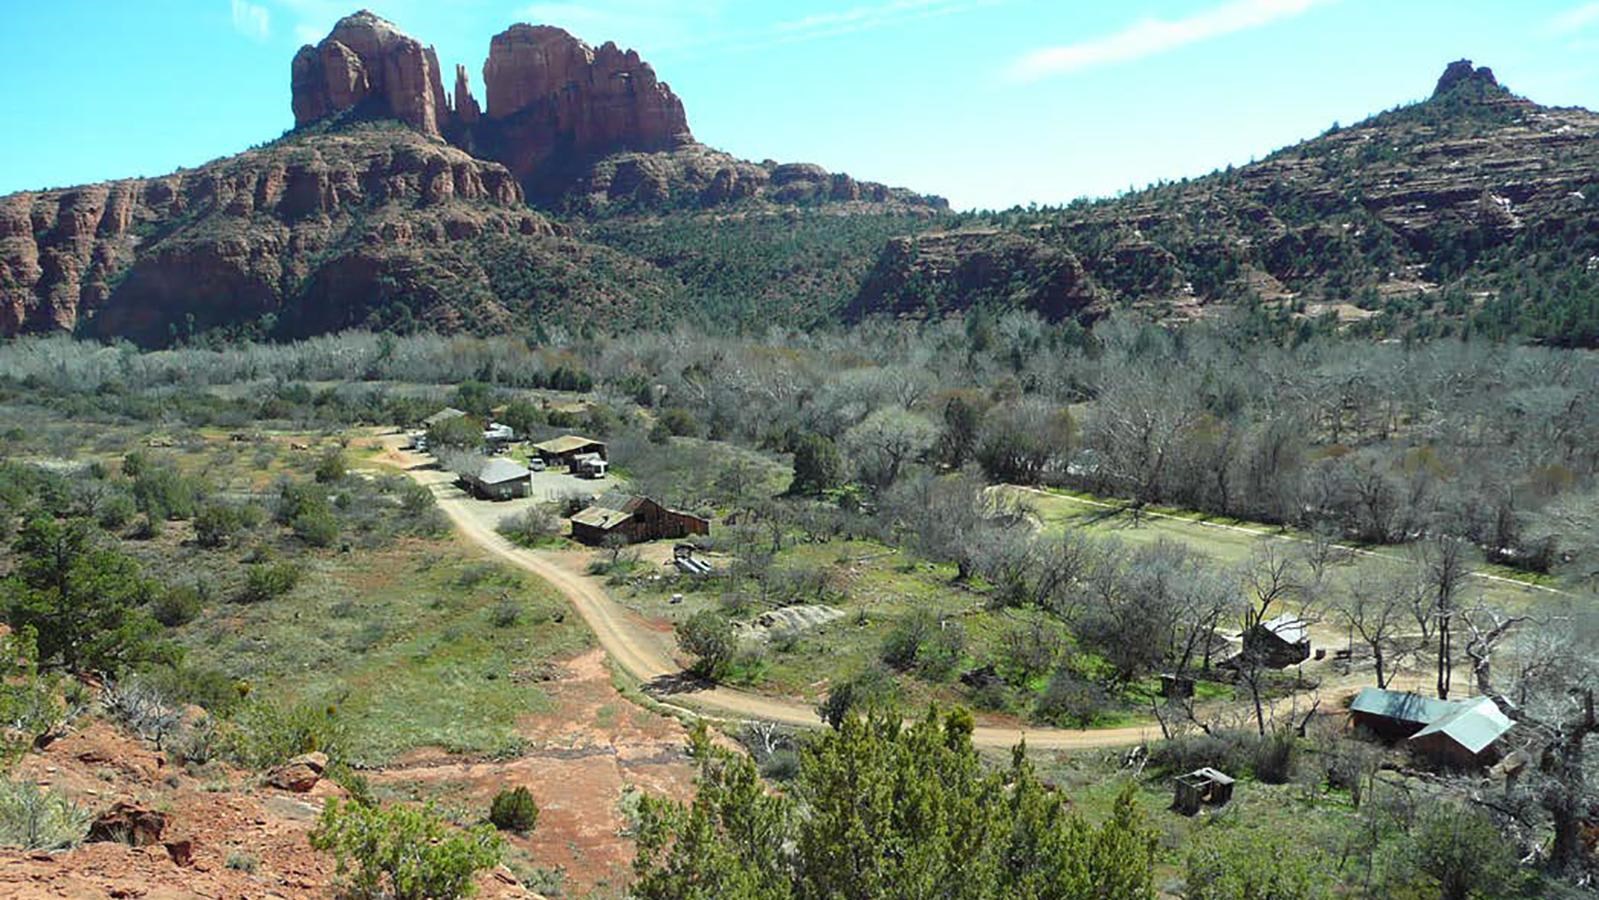 Overview of OK Ranch Historic District showing several buildings and large rock outcroppings in the 